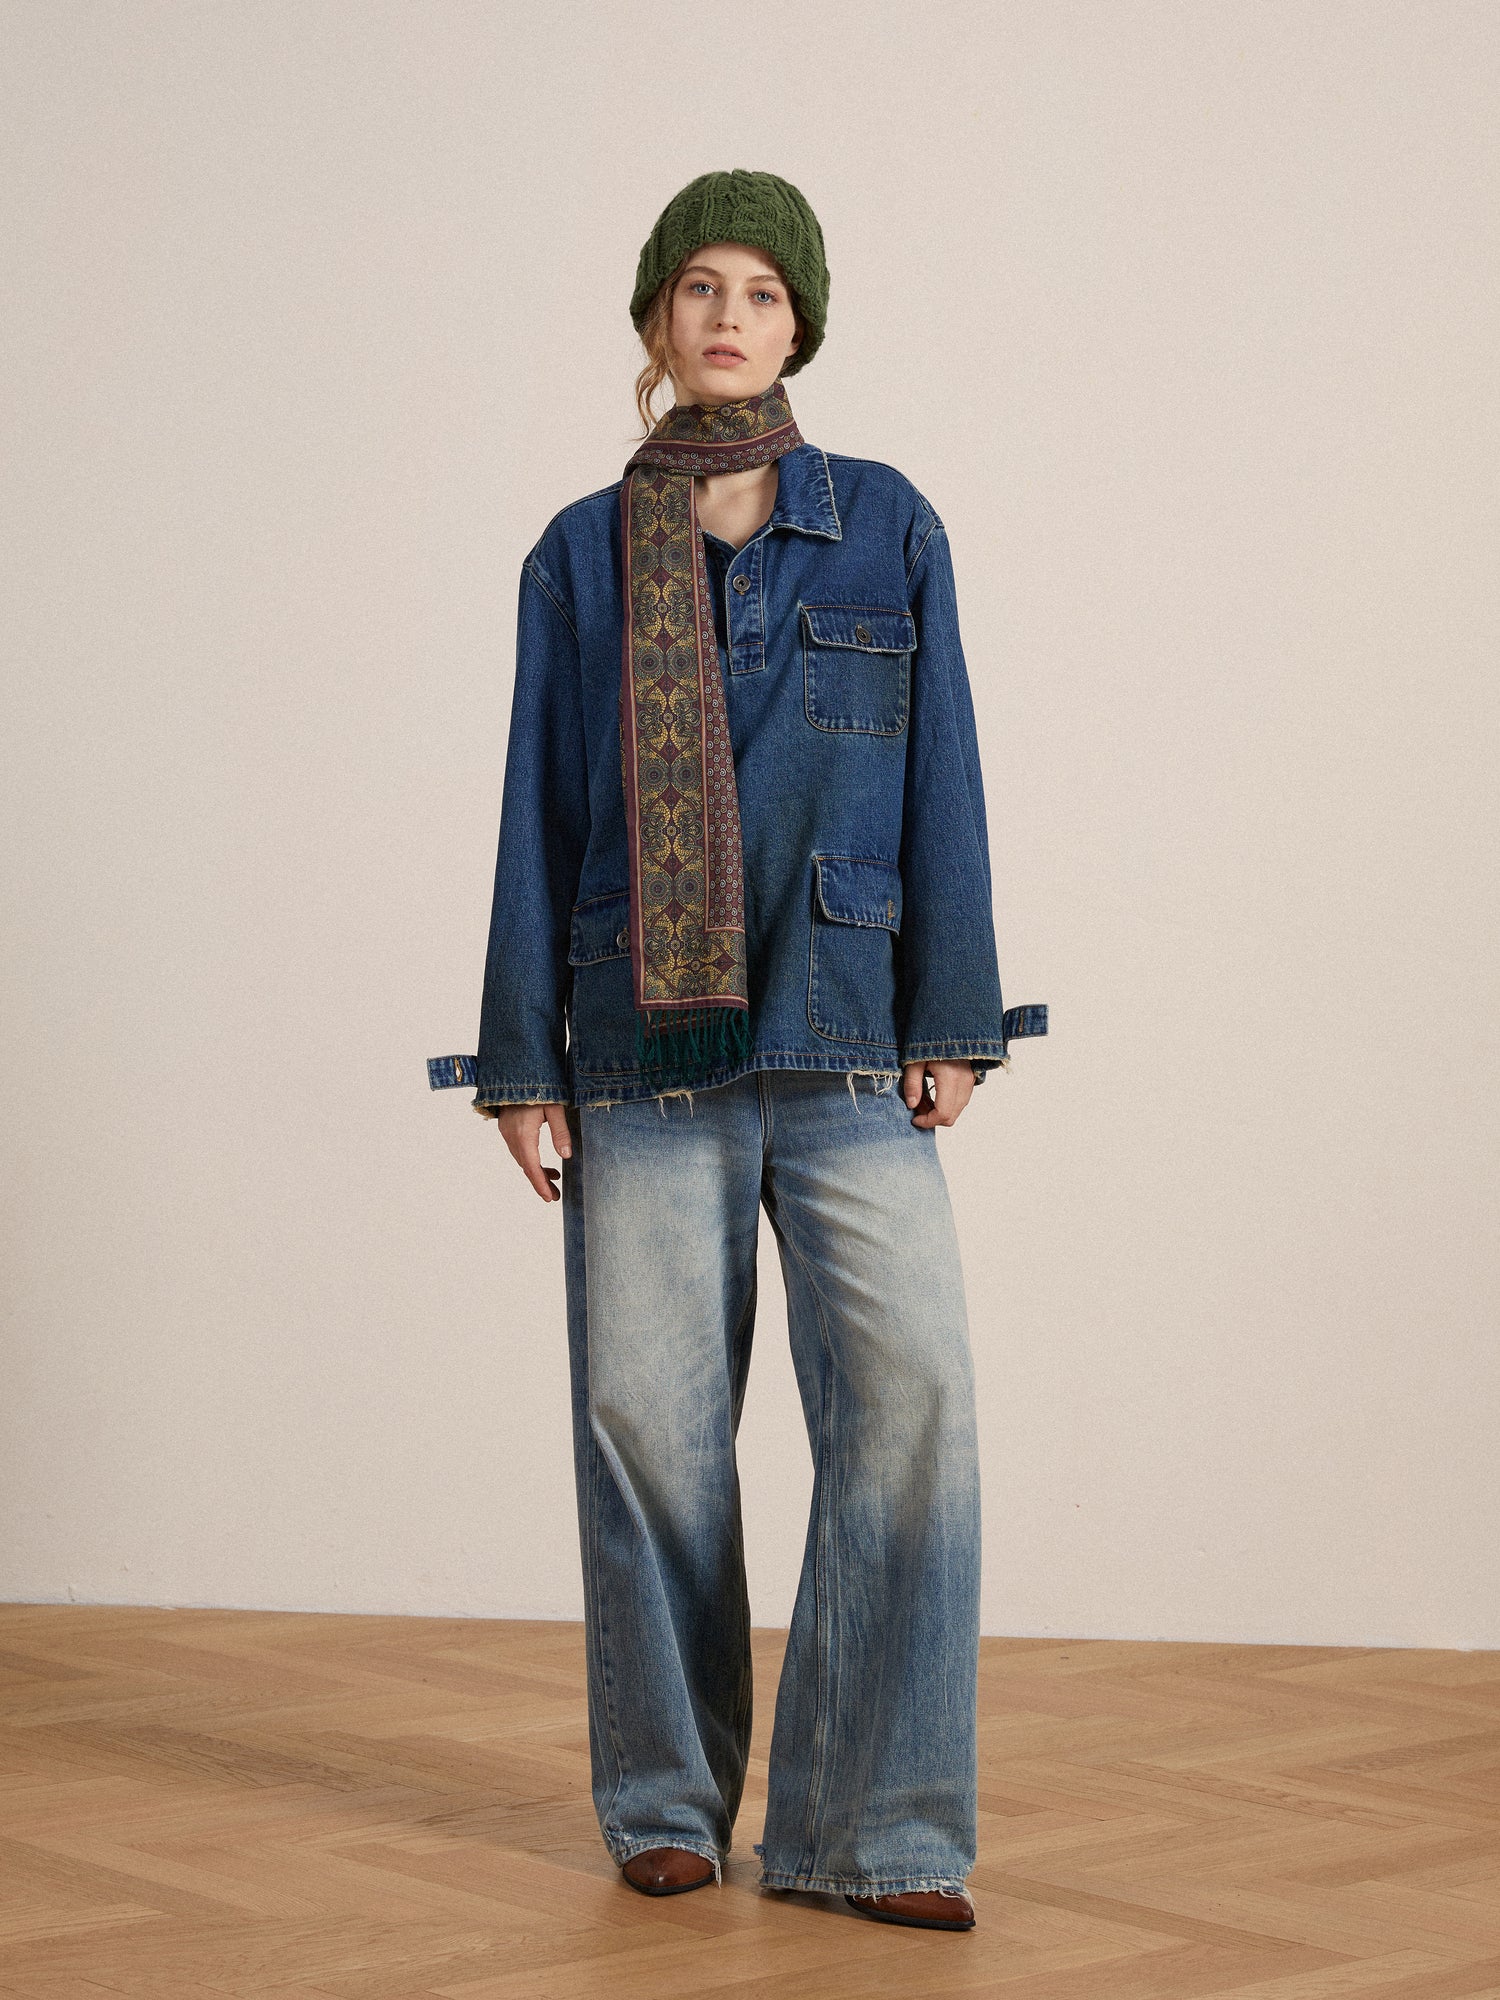 A woman stands in a studio, wearing a Found Azin Denim Pullover Work Shirt, wide-leg jeans, a patterned scarf, and a green beanie, looking at the camera with a neutral expression.